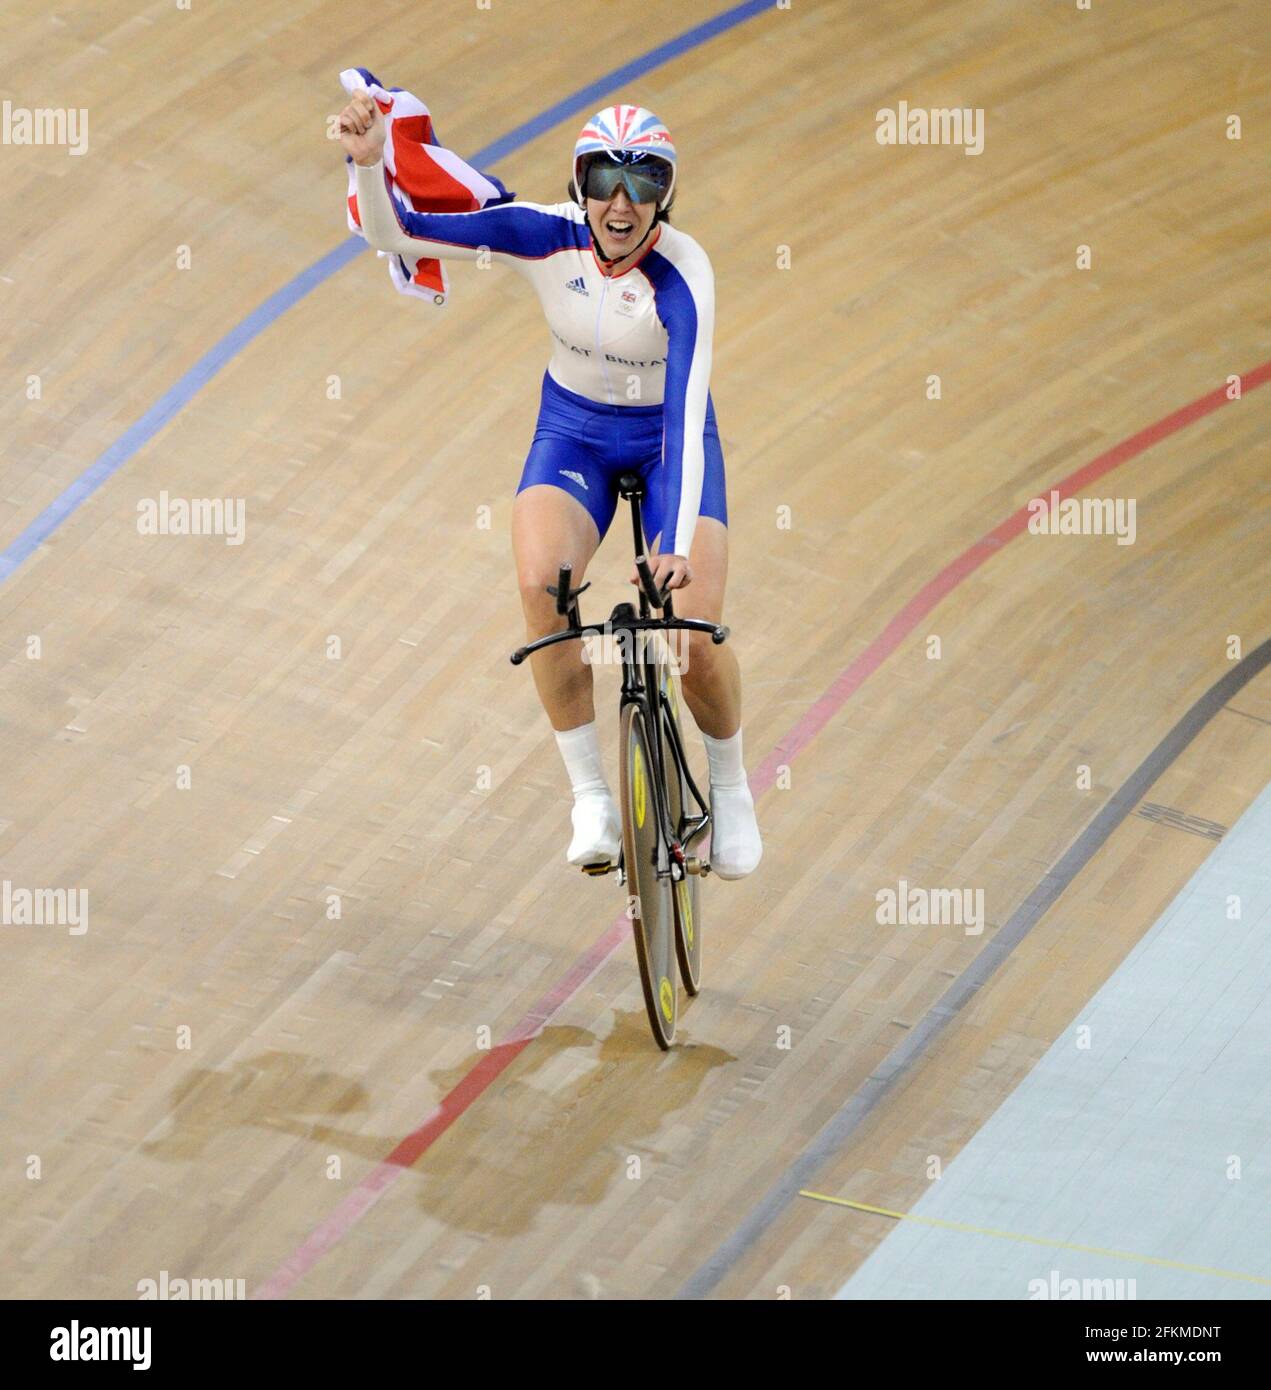 OLYMPIC GAMES BEIJING 2008.  9th DAY 17/8/08.  WOMANS IND. PURSUIT FINAL. REBECCA ROMERO AFTER WINNING GOLD.  PICTURE DAVID ASHDOWN Stock Photo